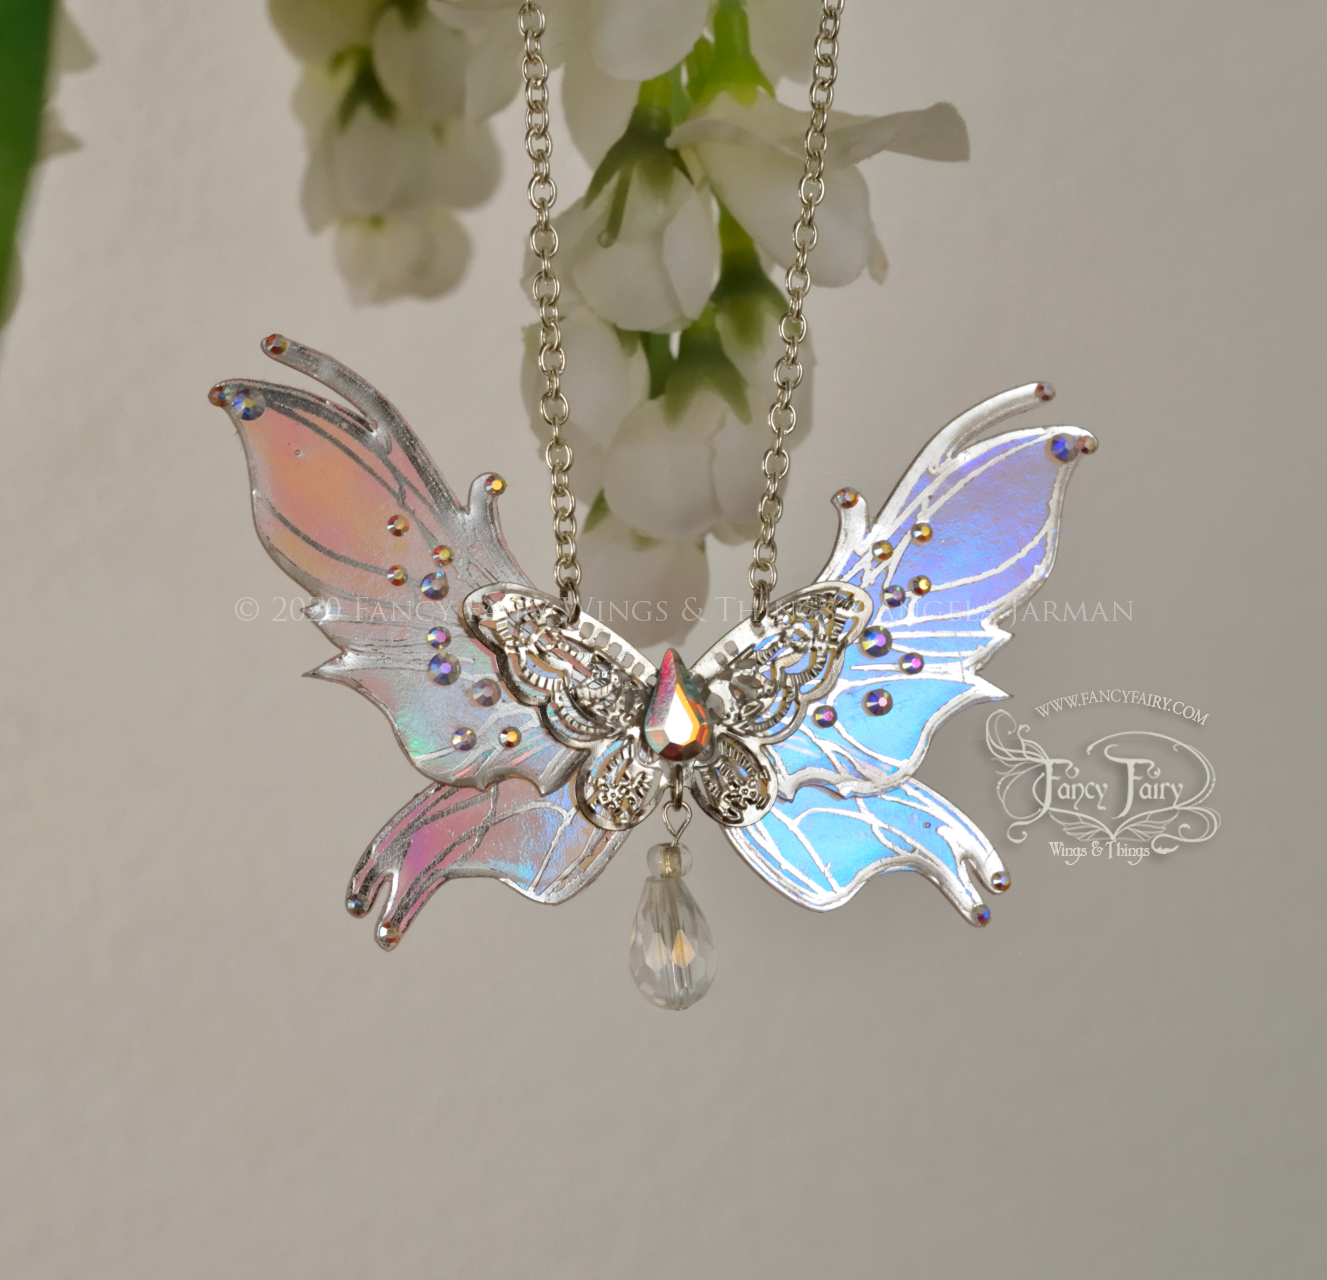 'Nightshade' 3 and 1/2 inch Fairy Wing Necklace in Light Crystal with Silver Accents